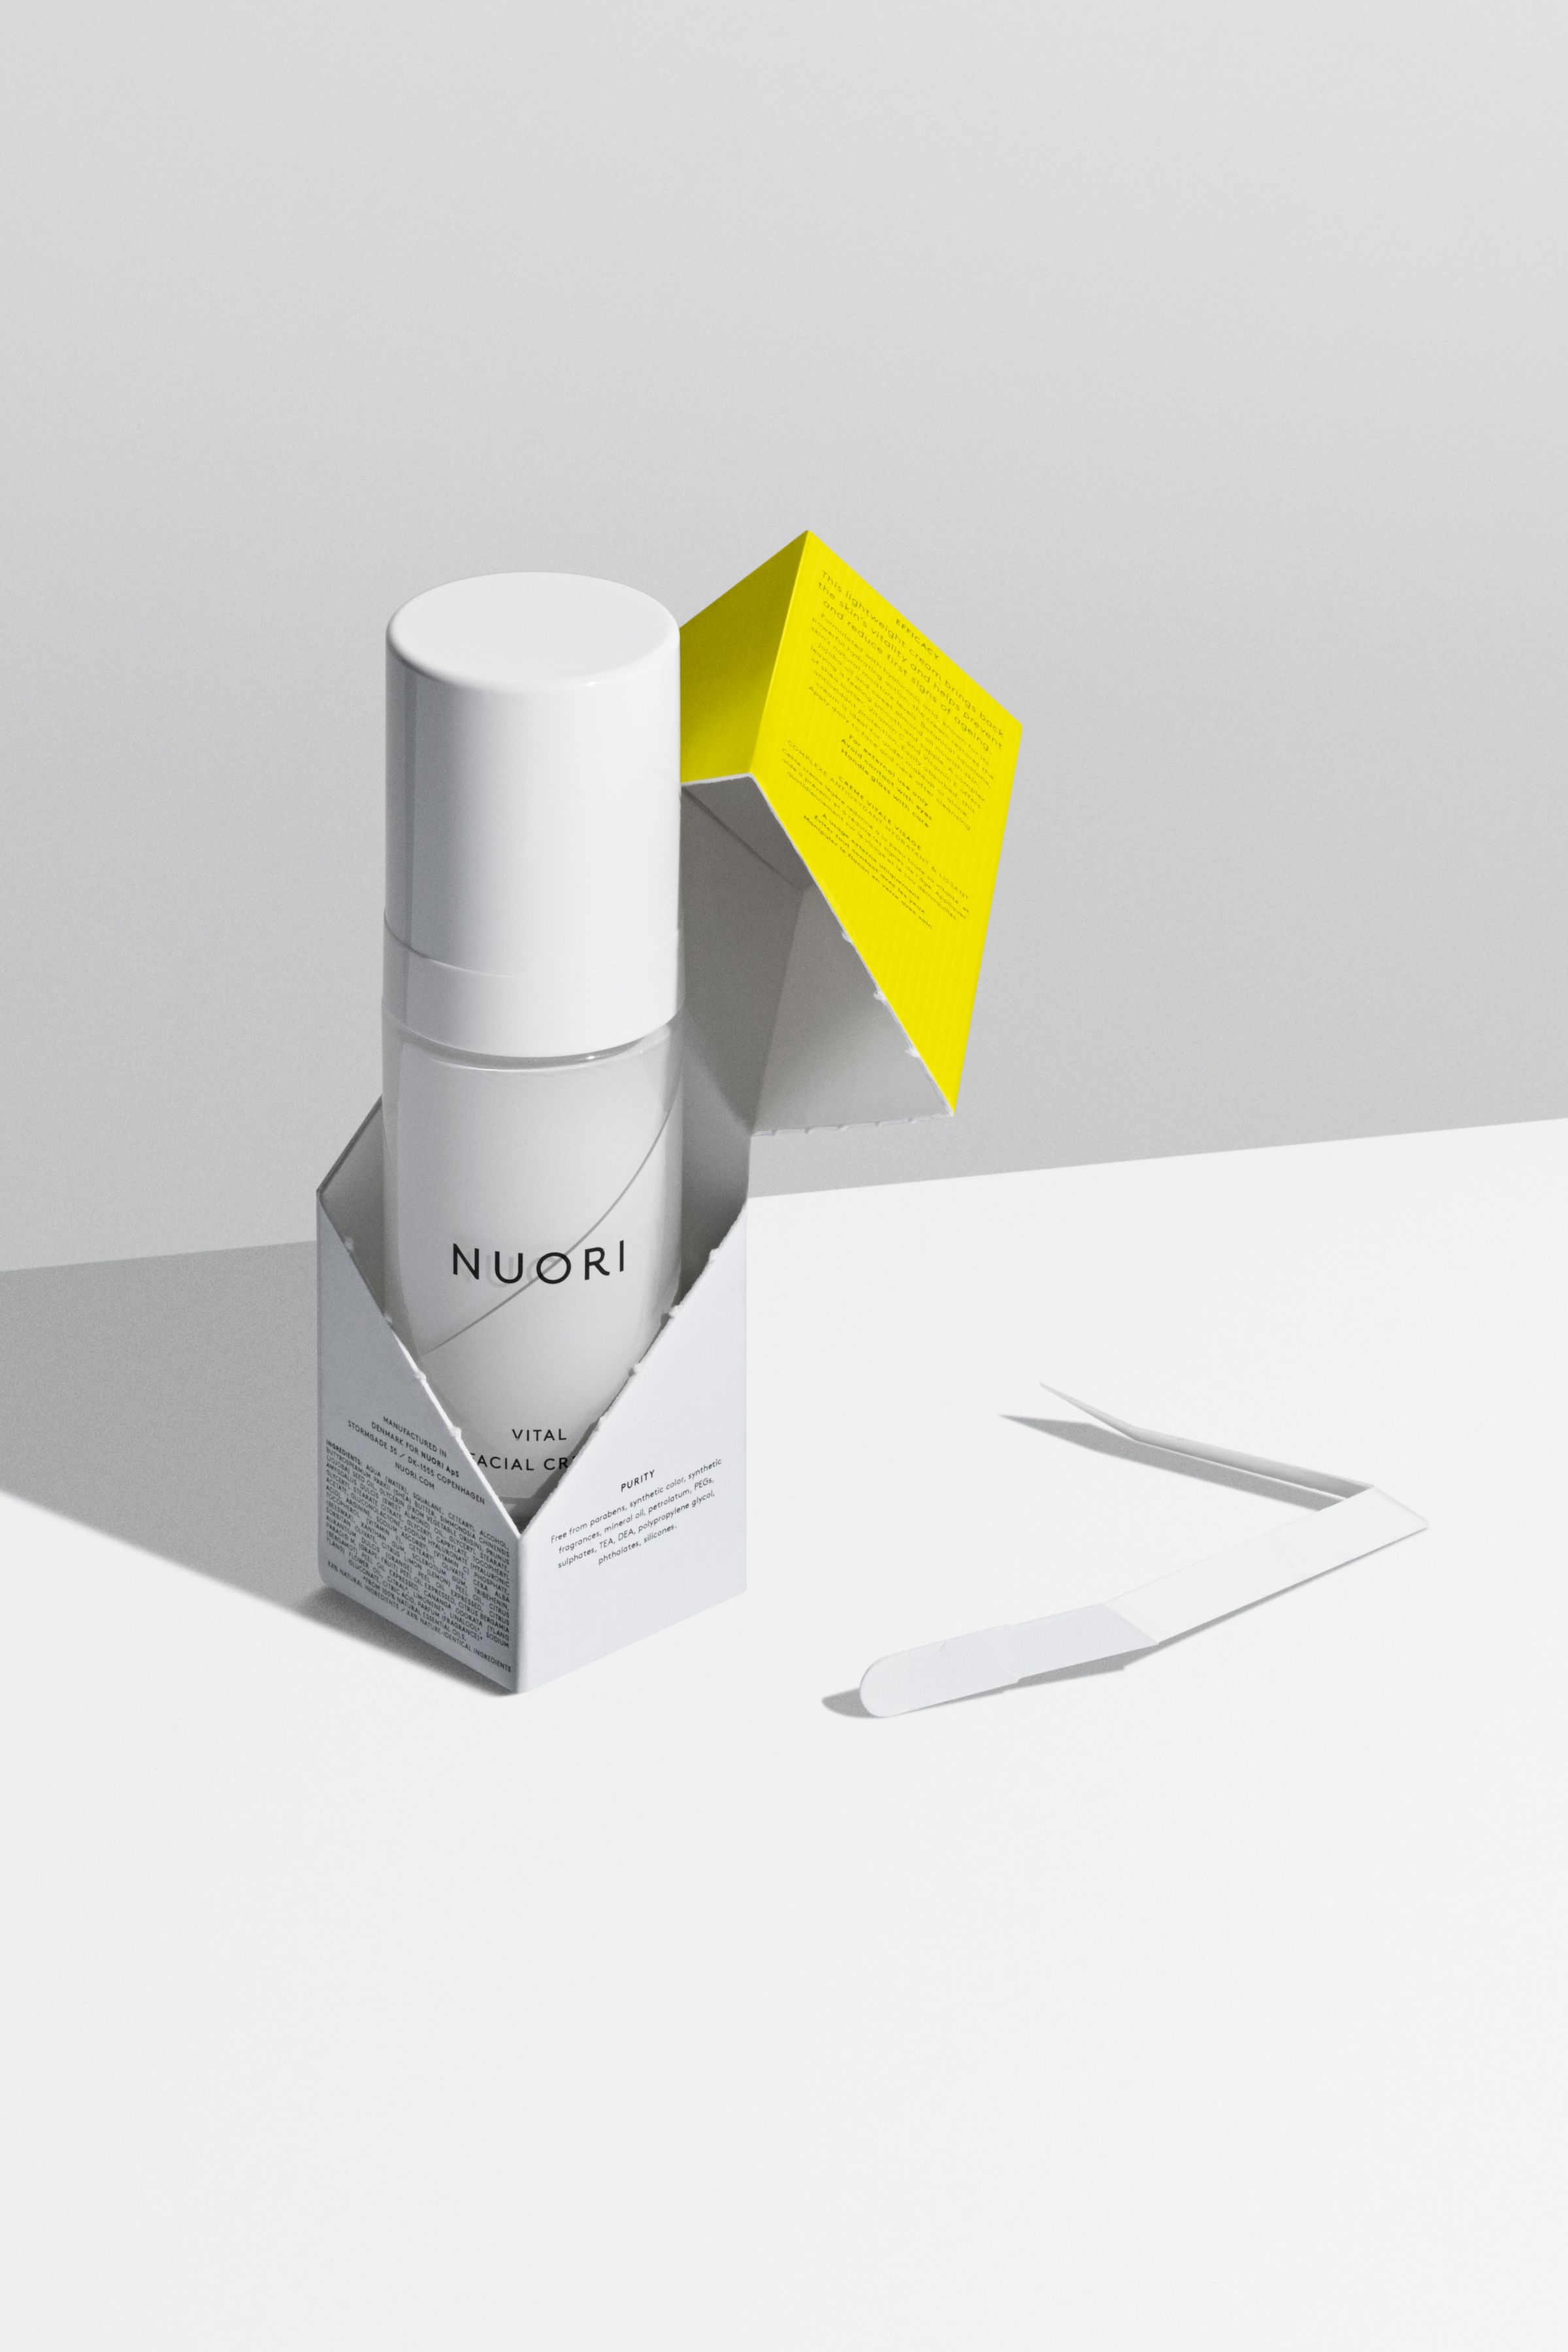 Nuori packaging design with tear open seal